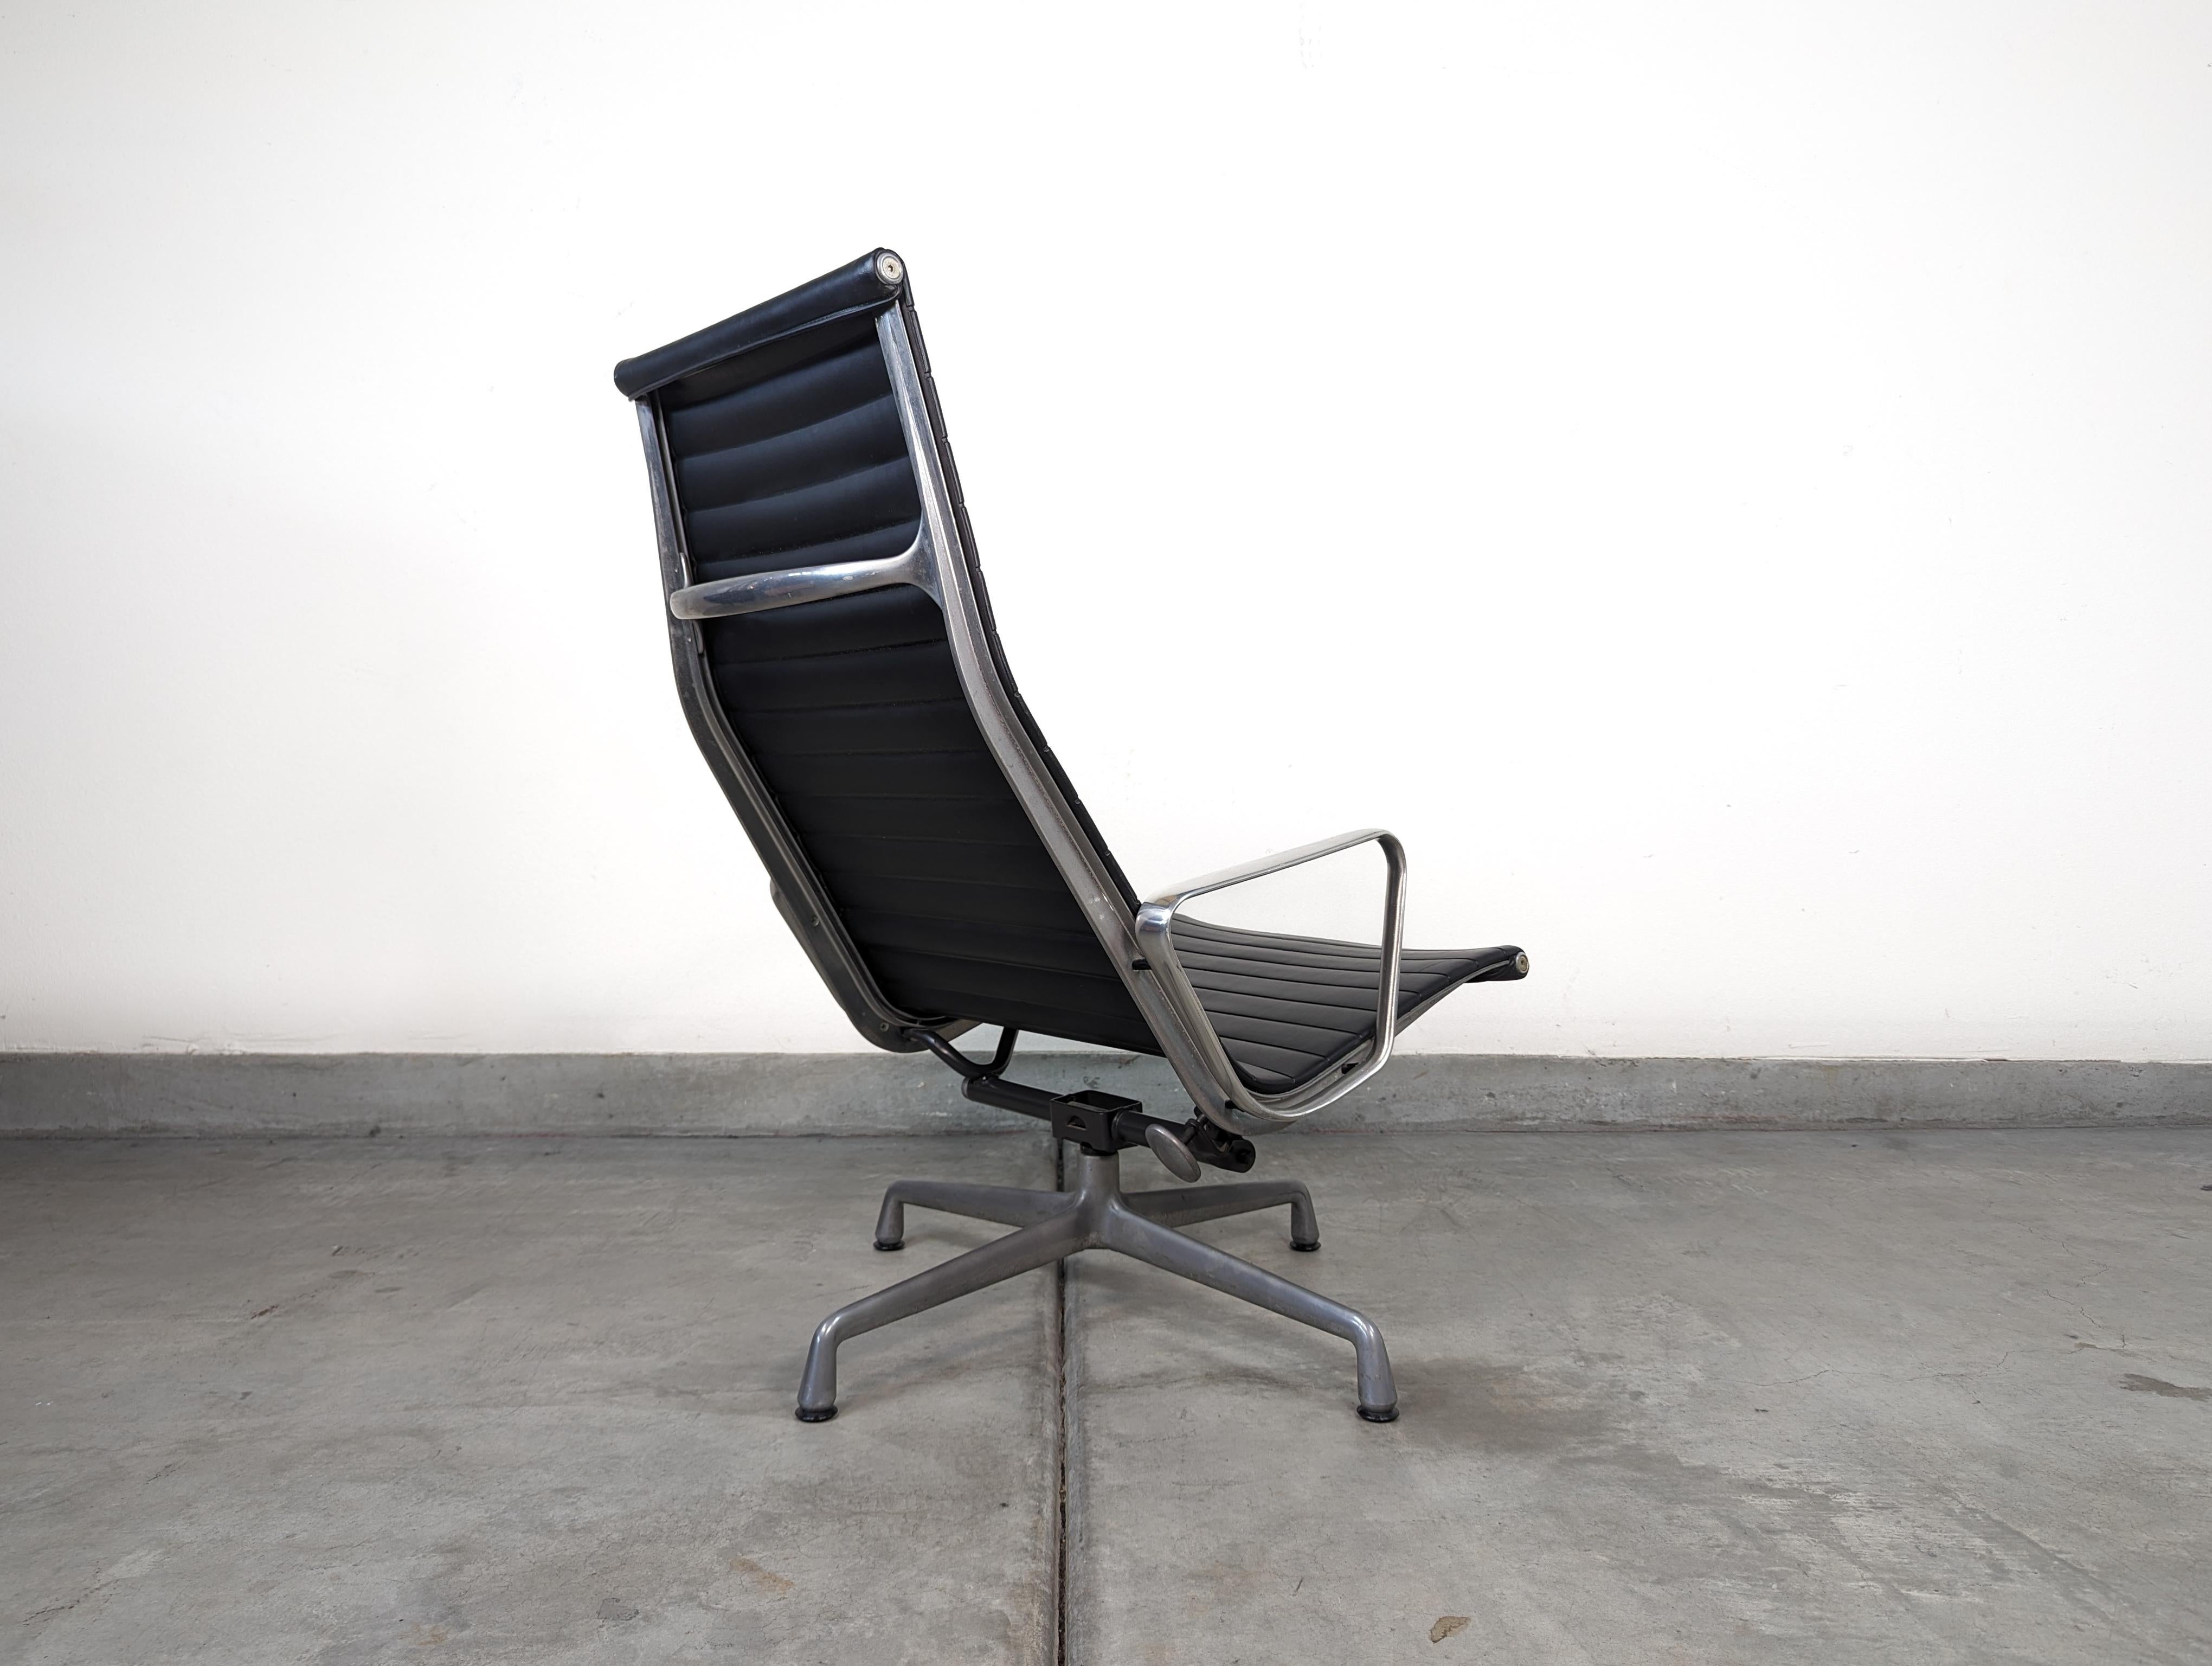 Eames Aluminum Group Lounge Office Chair by Herman Miller, c1990s In Excellent Condition For Sale In Chino Hills, CA